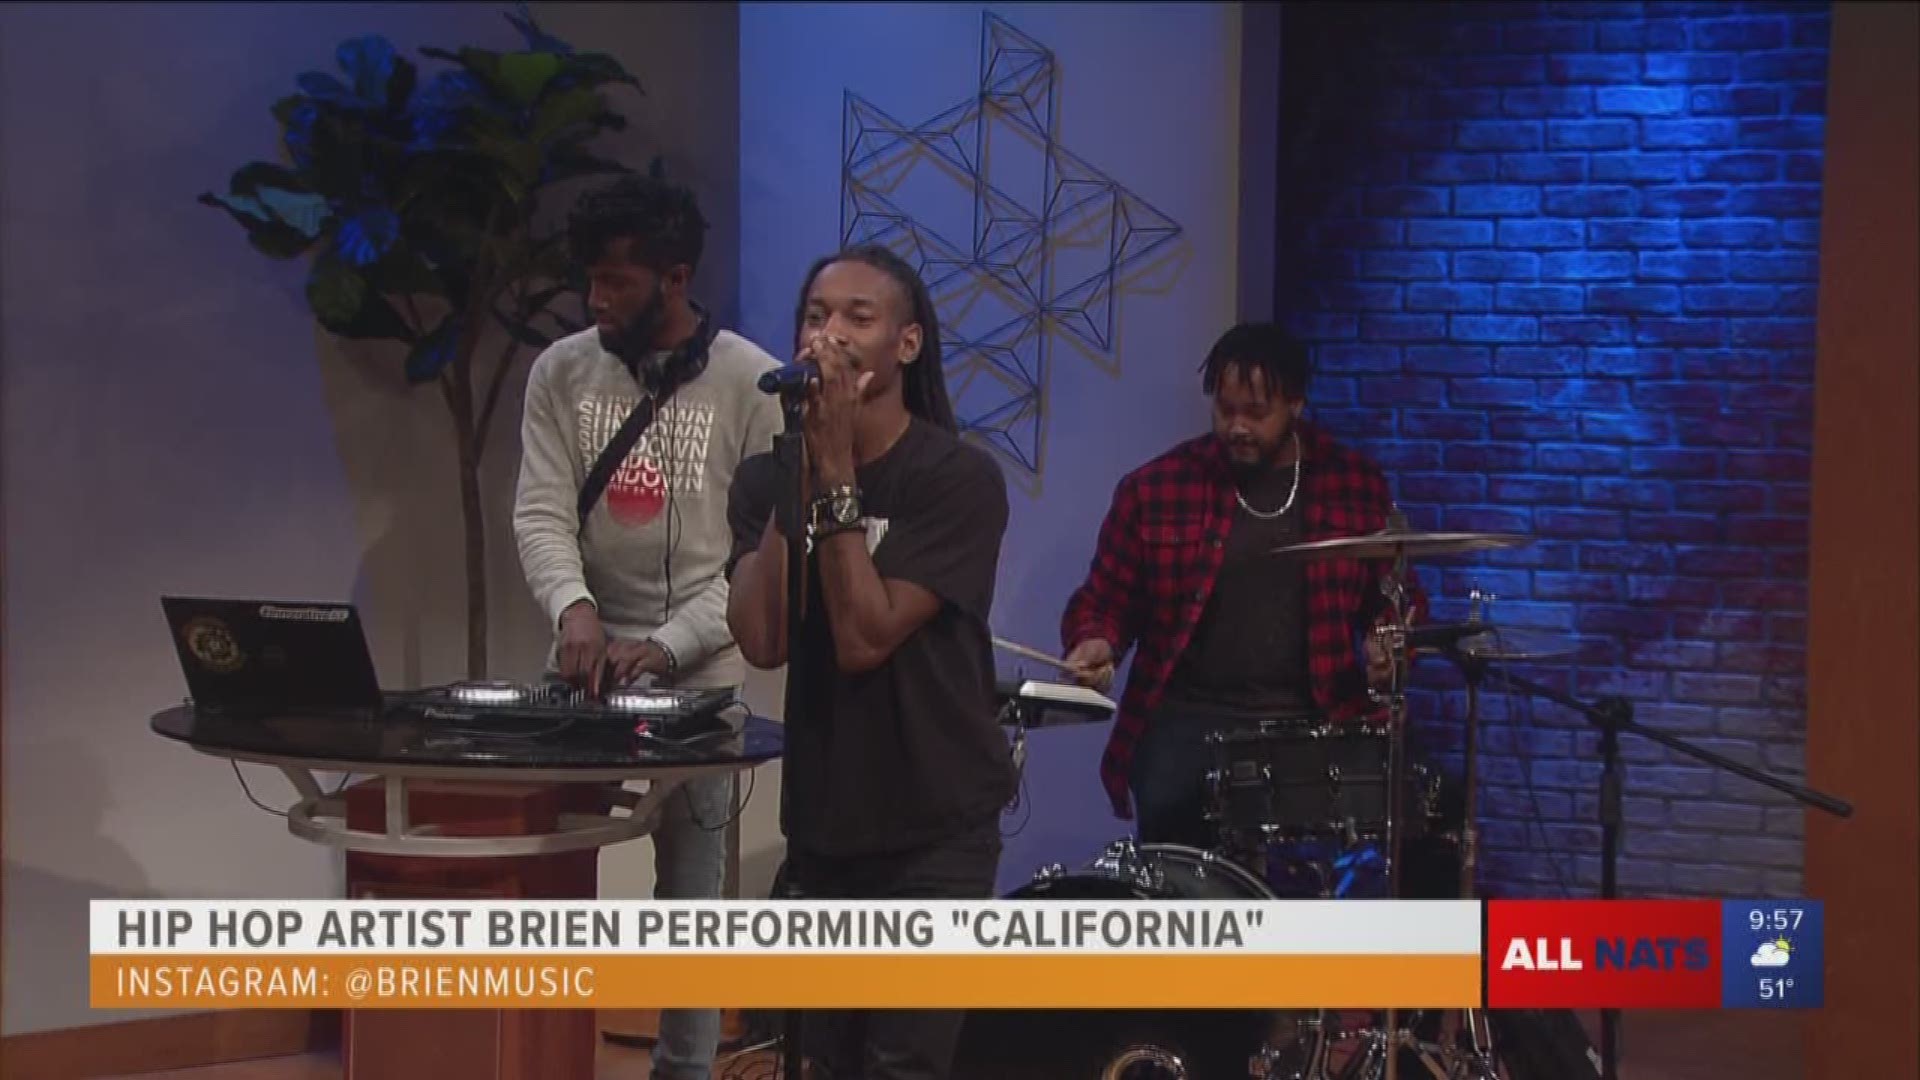 This week's DMV soundcheck artist Brien performs his song "California". This segment was sponsored by the  DC OCTFME.